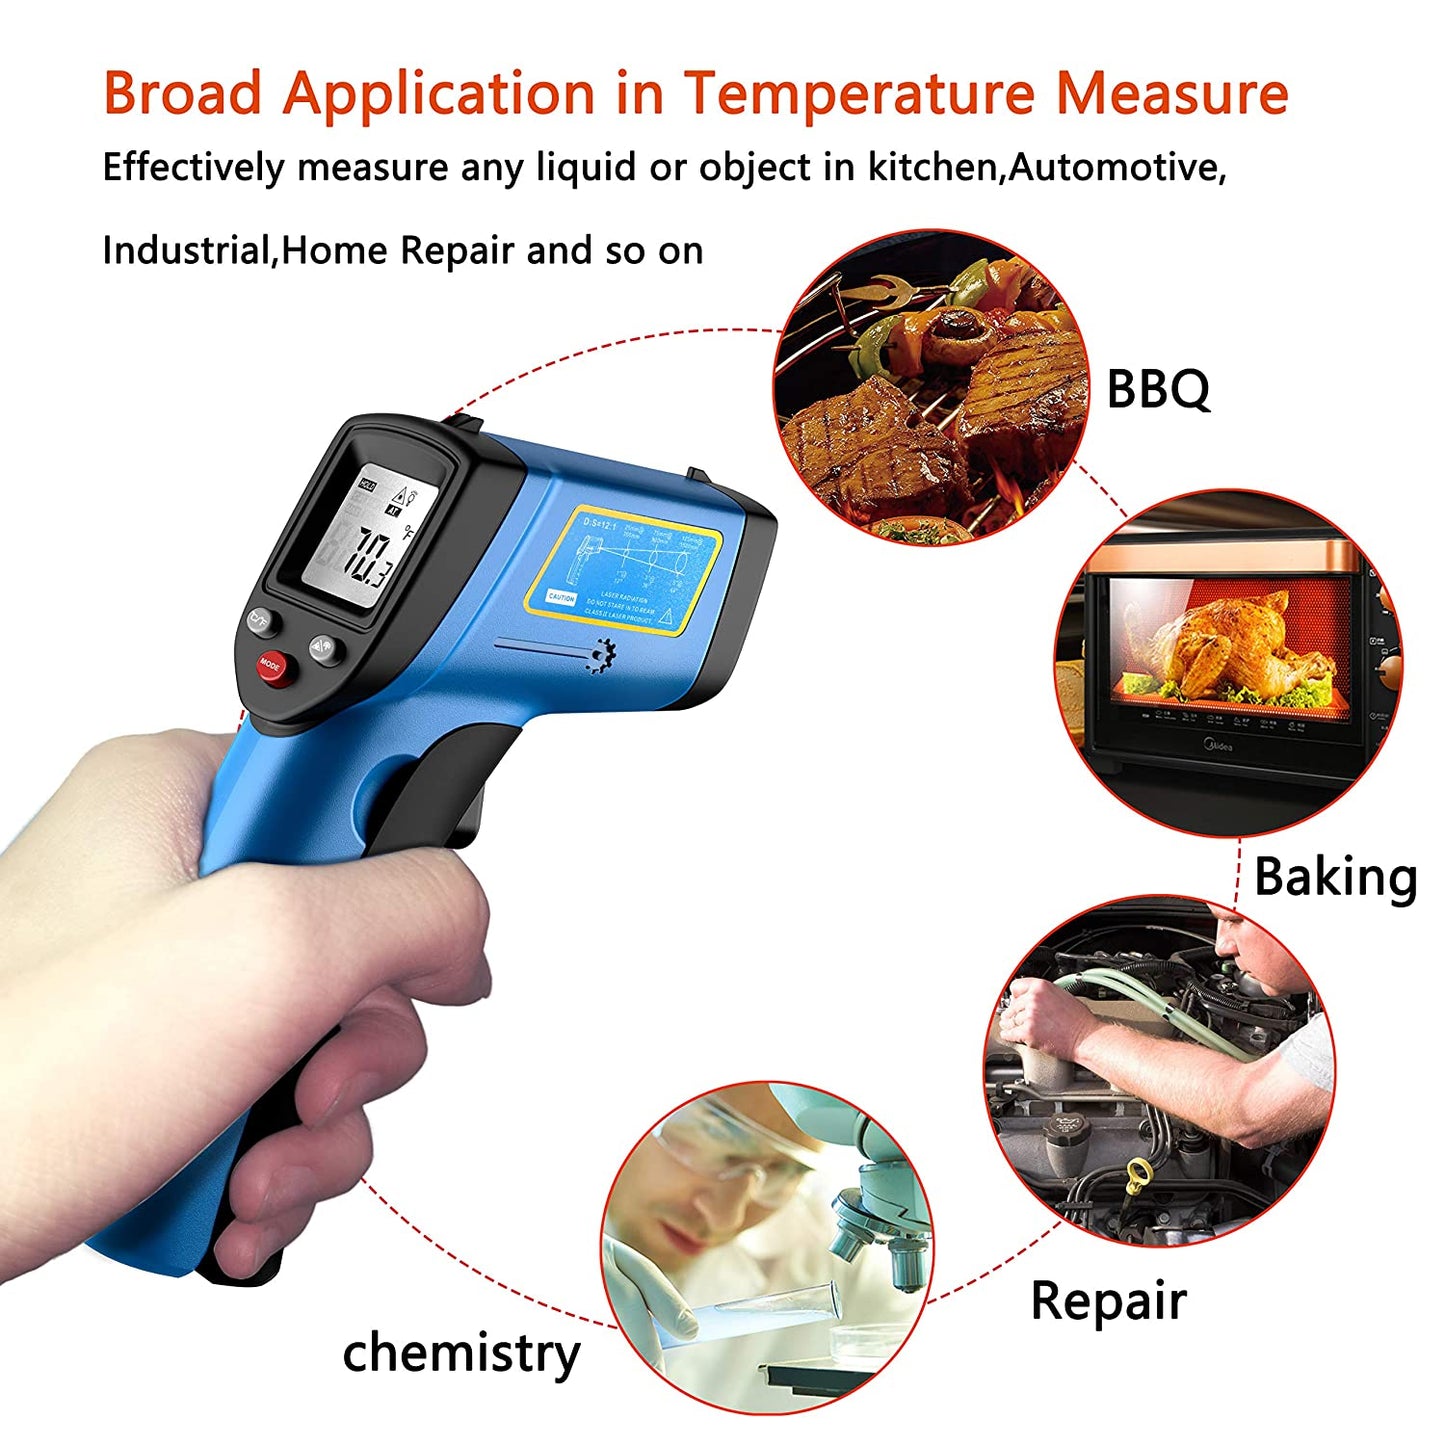 RISWOJOR Infrared Thermometer Cooking Digital Laser Temperature Gun,Adjustable Emissivity &MAX/MIN/at/Cal；-58°F~986°F (-50°C～530°C) Temp Gun IR Thermometer Gun for Industrial/Kitchen Cooking/Ovens - (For 8 piece(s))